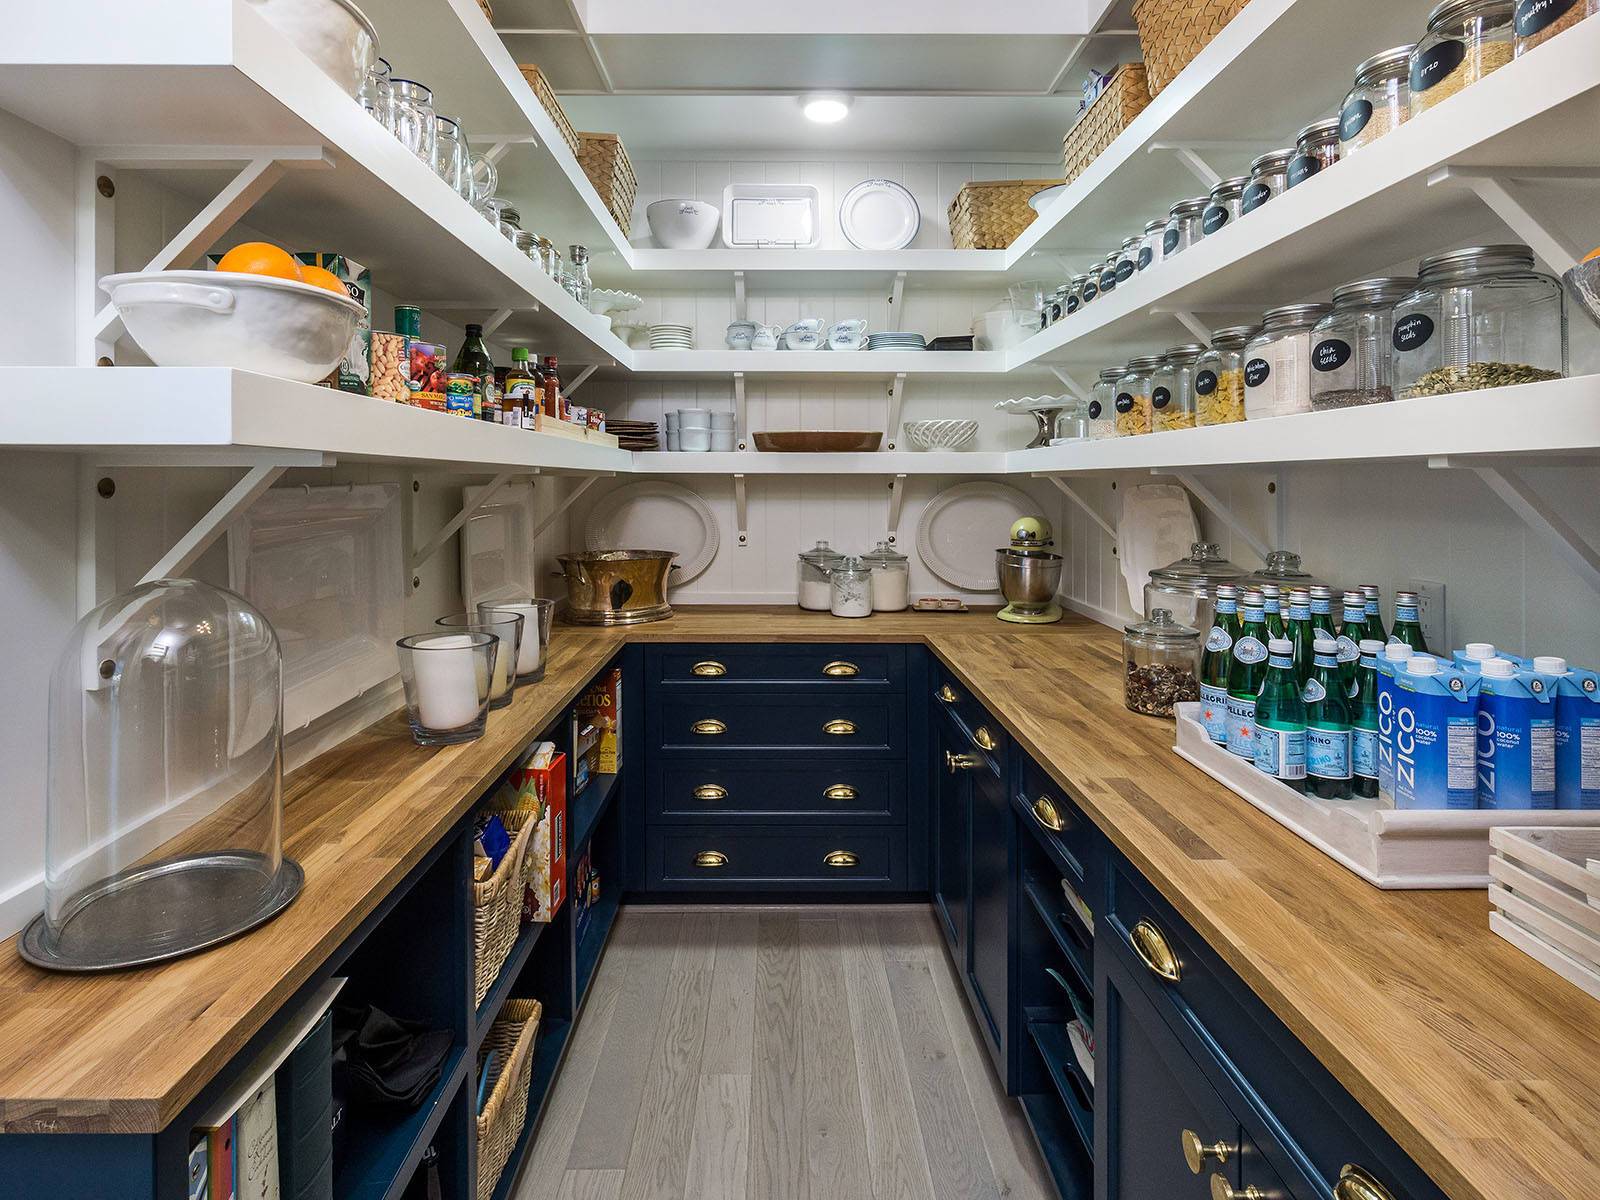 Impressive Walk in Pantries We'd Want In Our Homes